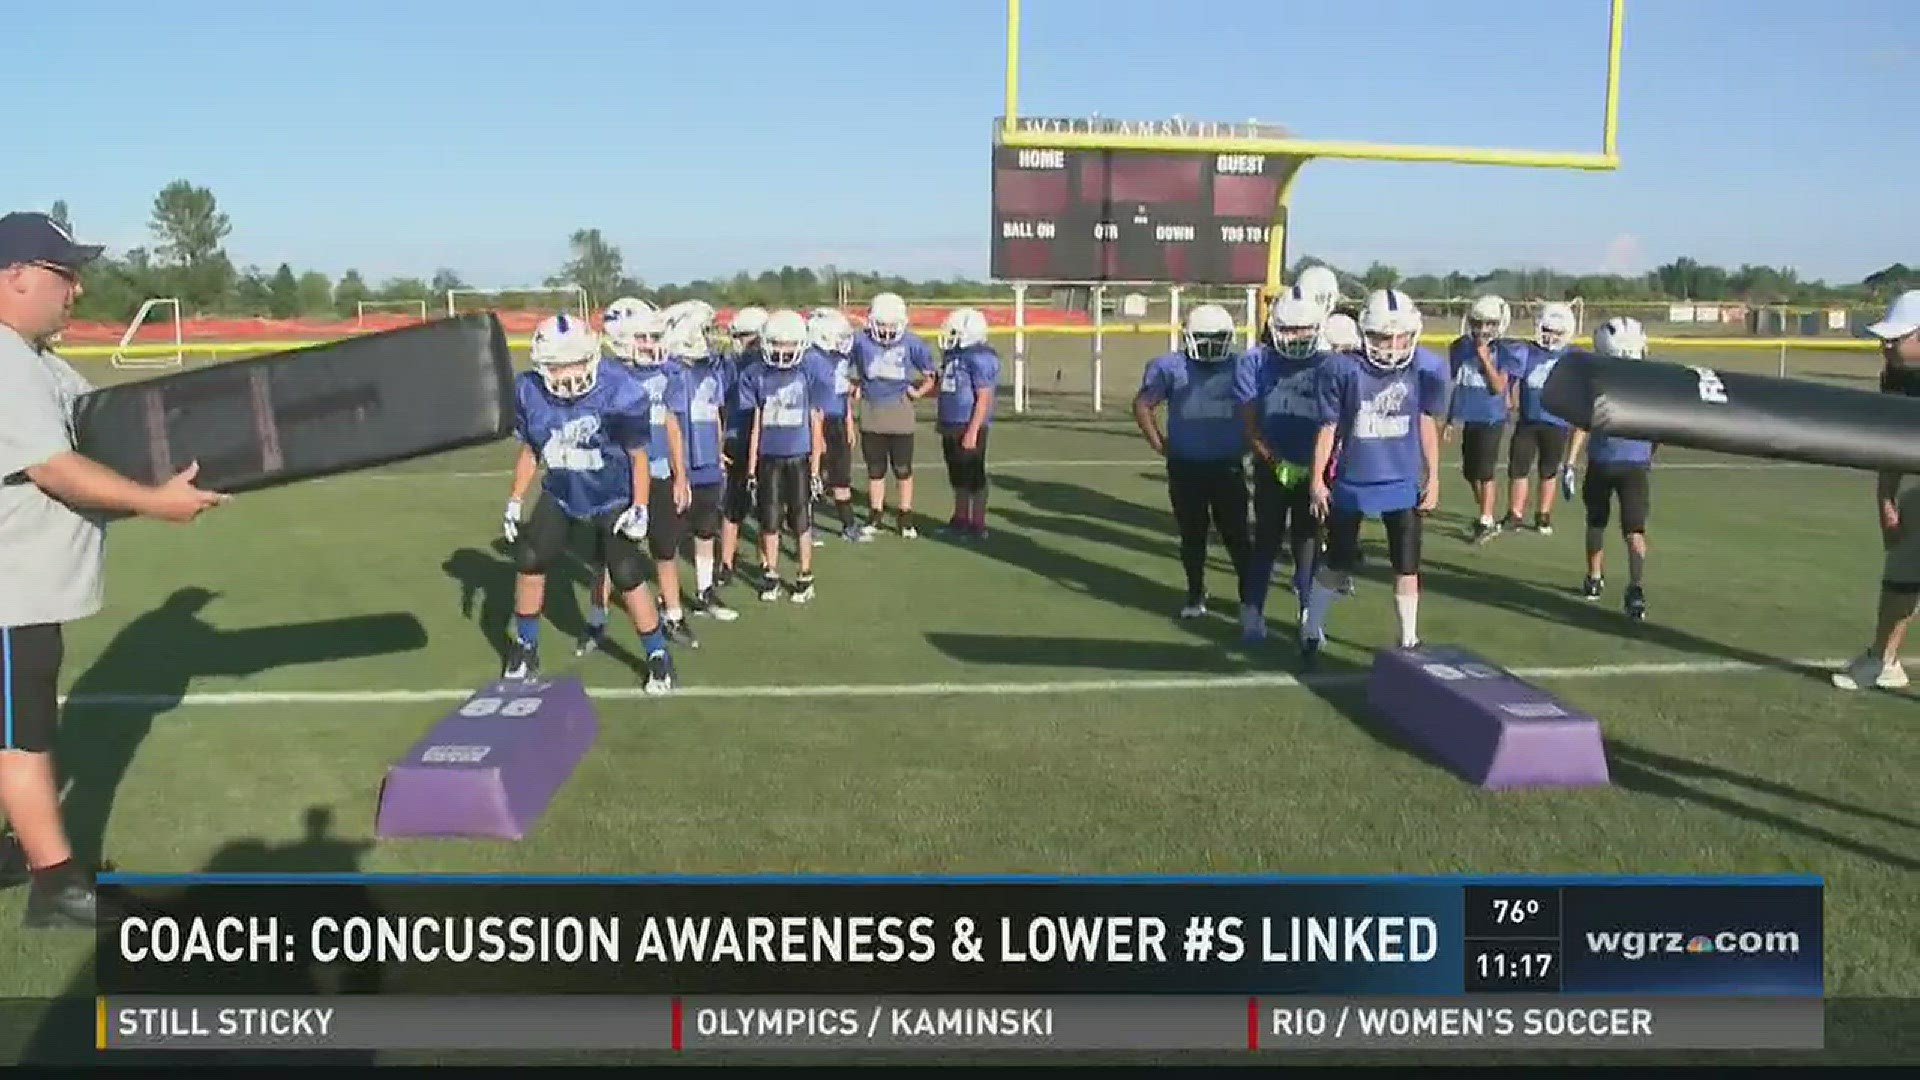 Coach: concussion awareness & lower enrollment numbers linked